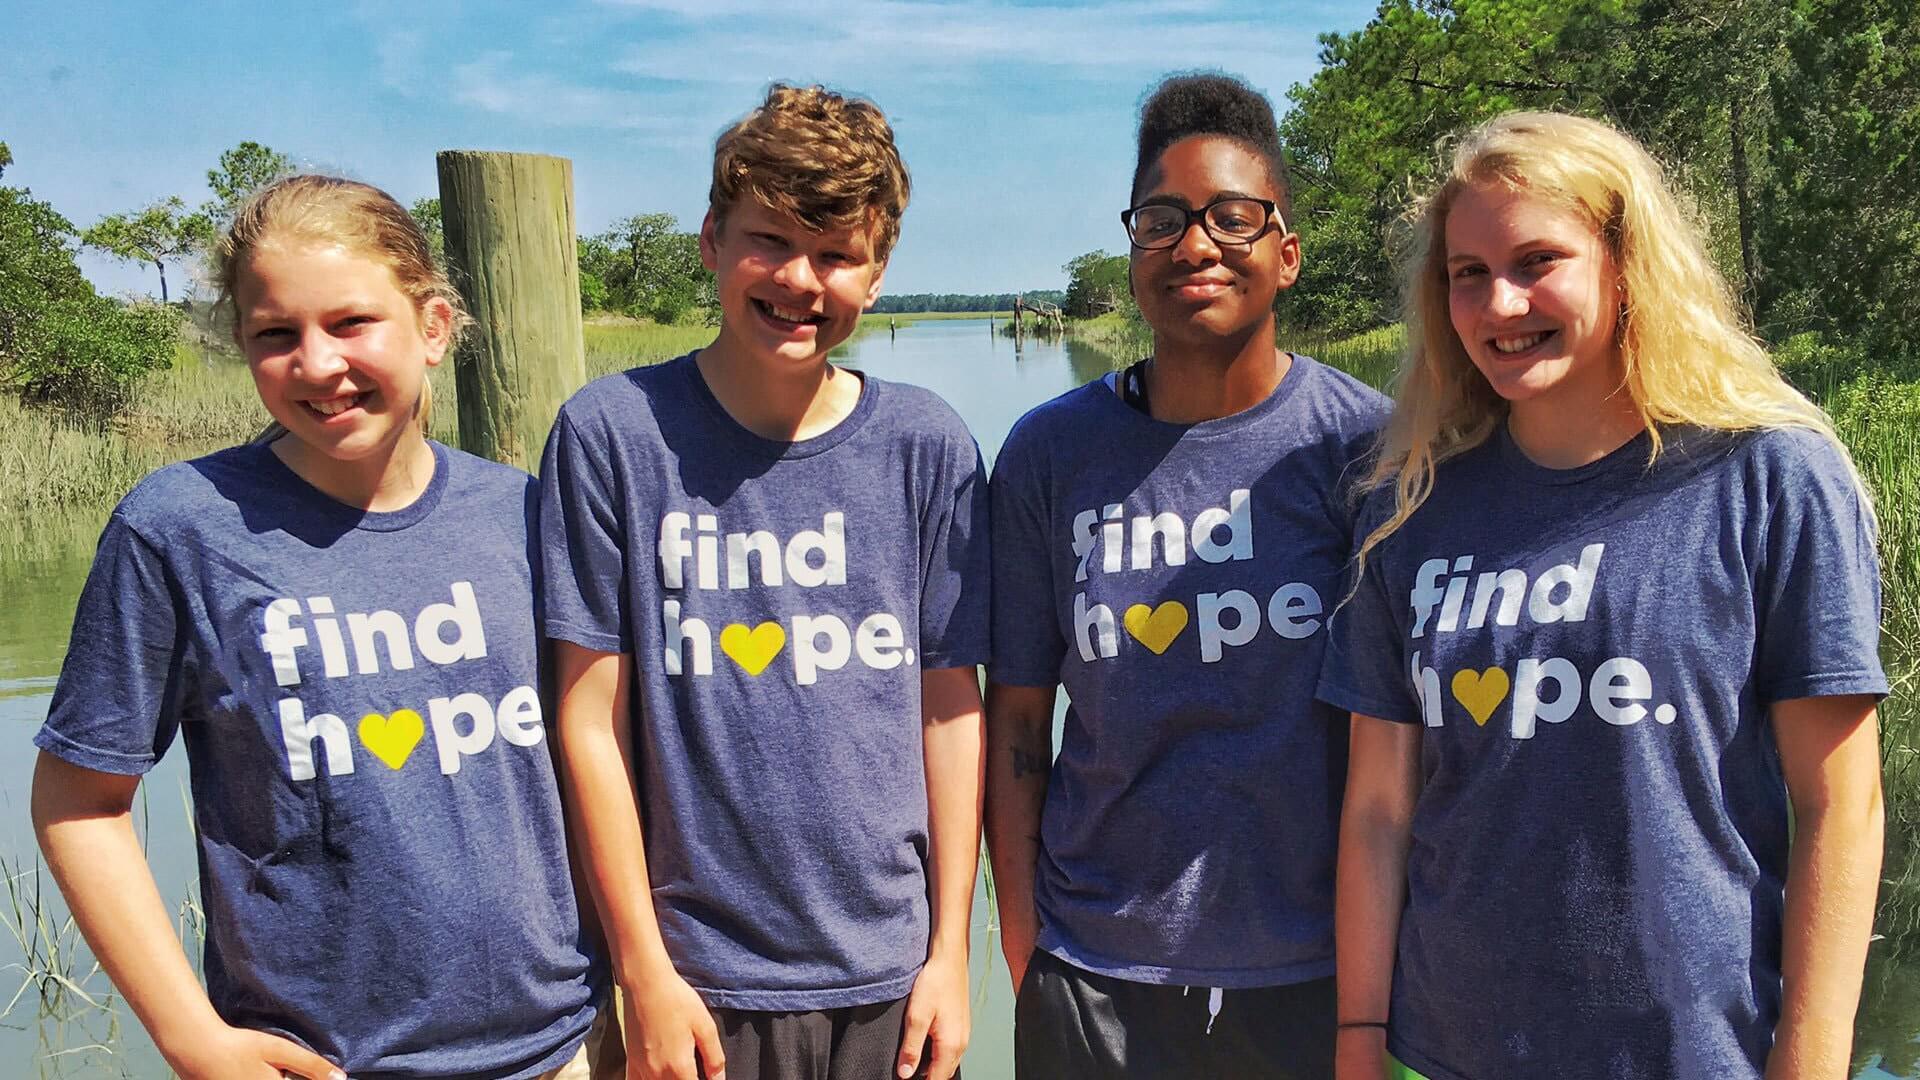 Get your “Find Hope” apparel in our online store